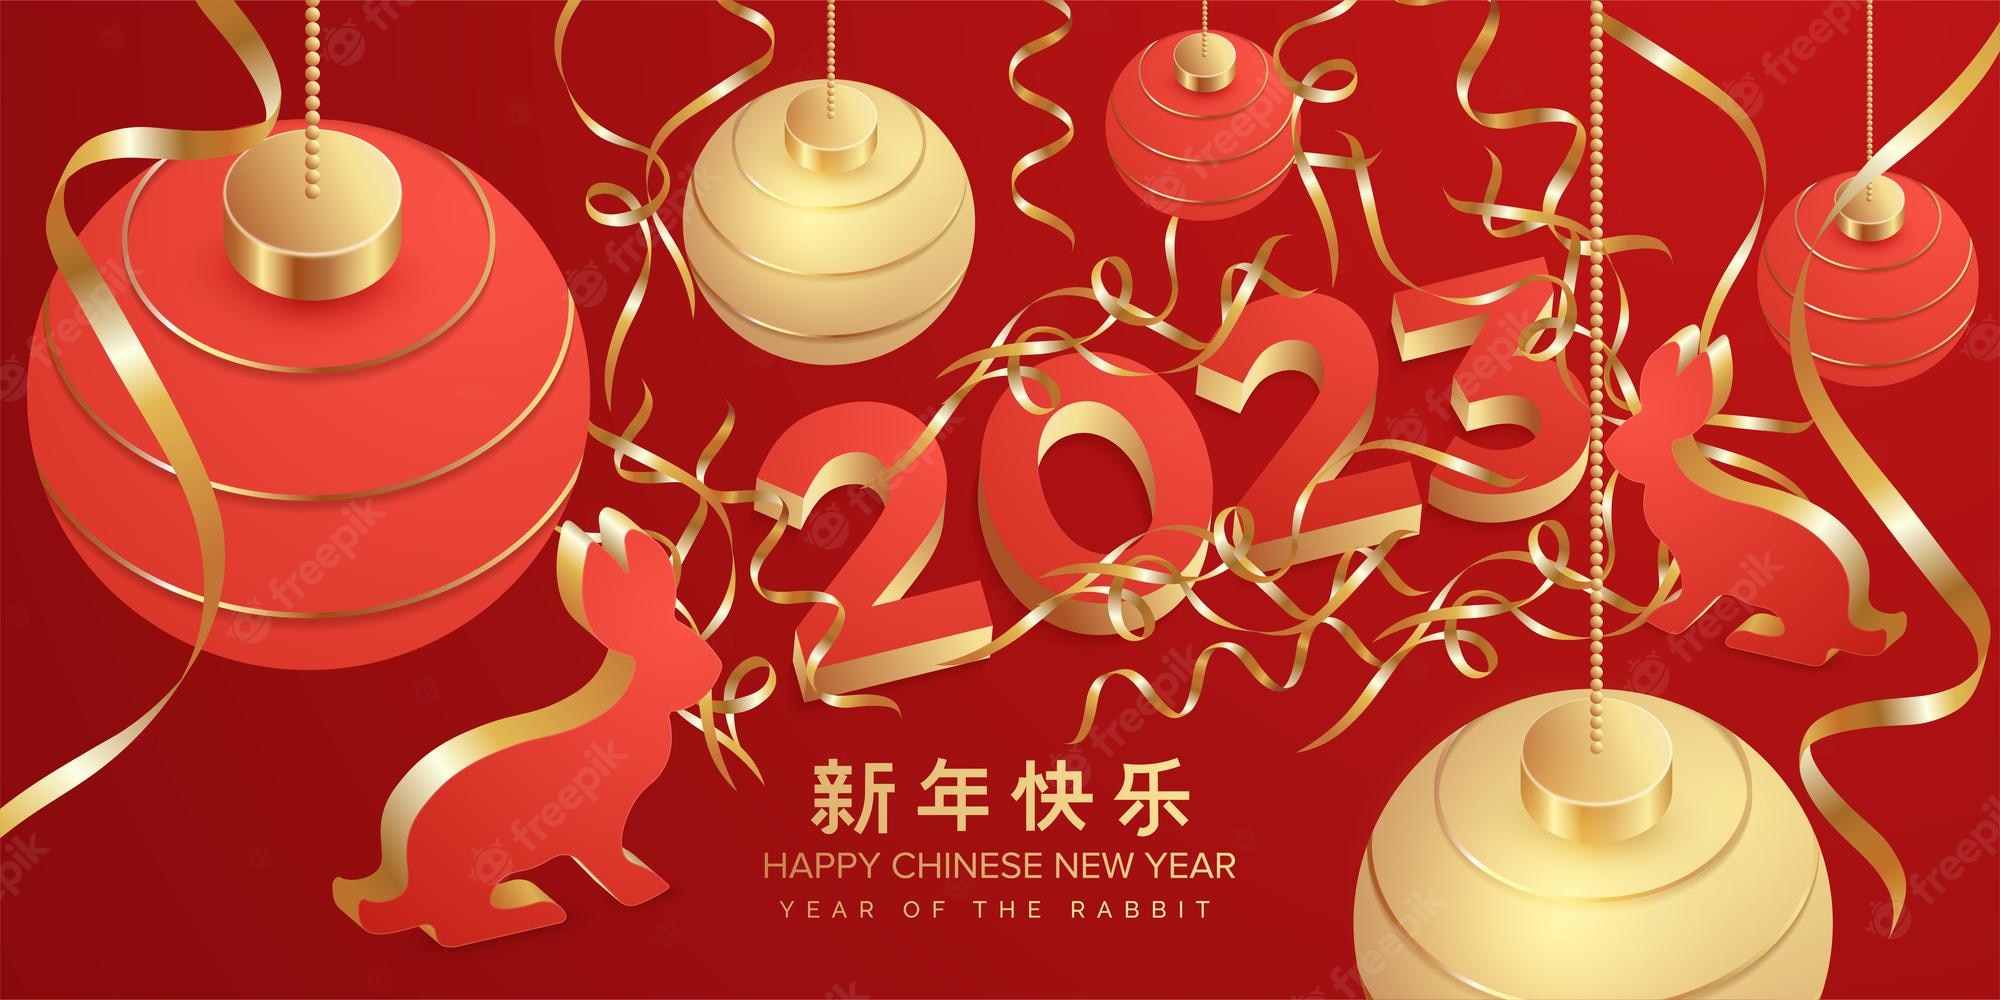 Premium Vector. Happy chinese new year 2023 year of the rabbit greeting background